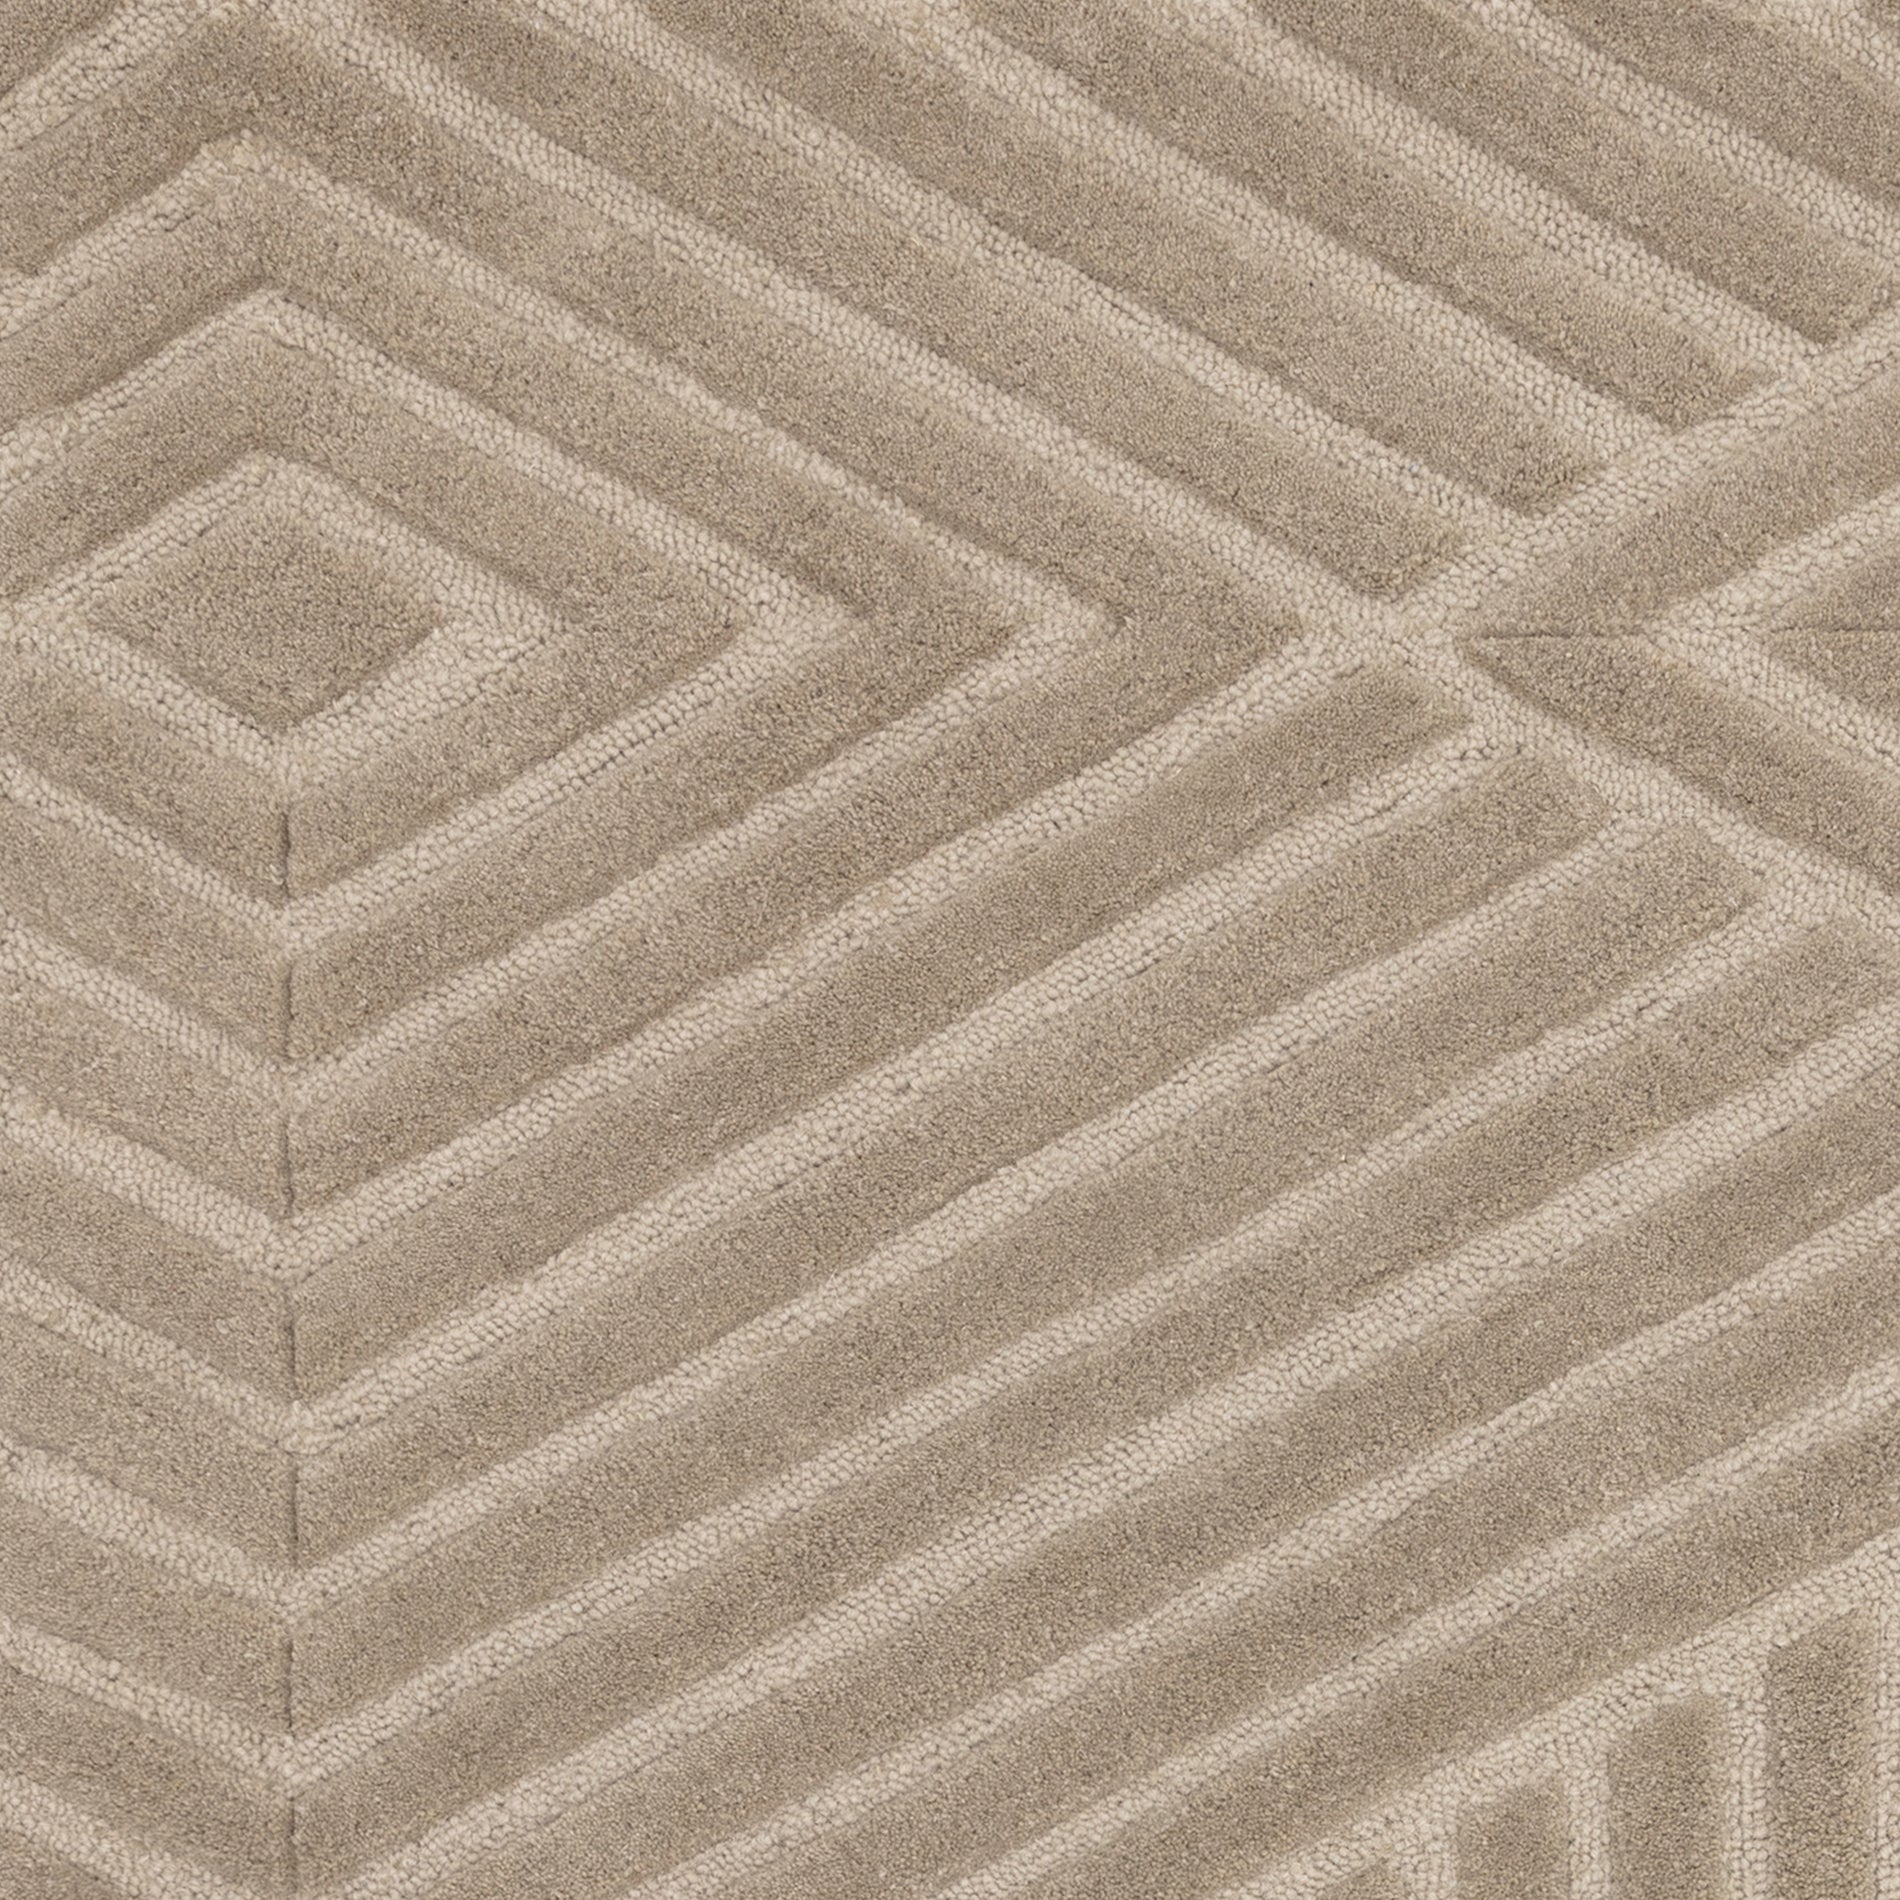 Contemporary_Wimble_Handtufted_Wool_Rug_Taupe_Brown_Industville_RG-57-HTW-TA-_Details_Front